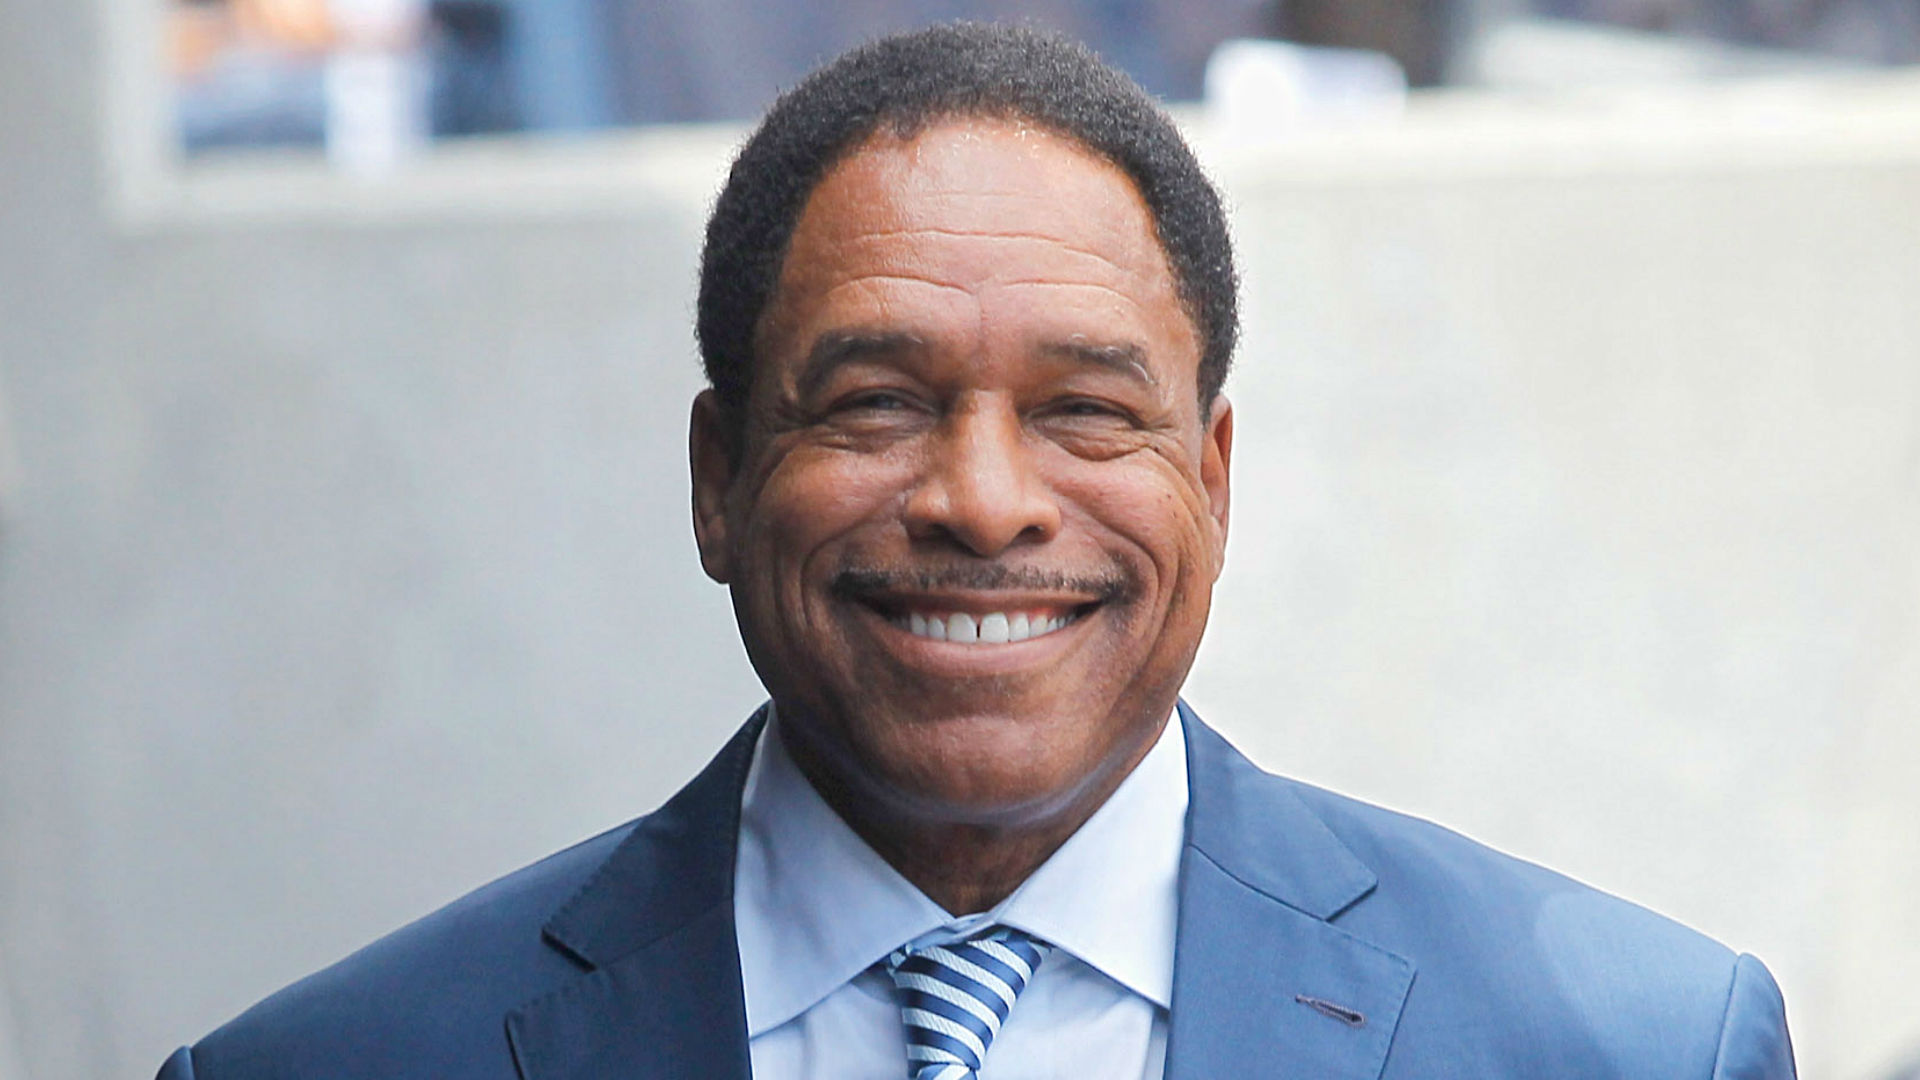 Dave Winfield delivers Hall of Fame induction speech 